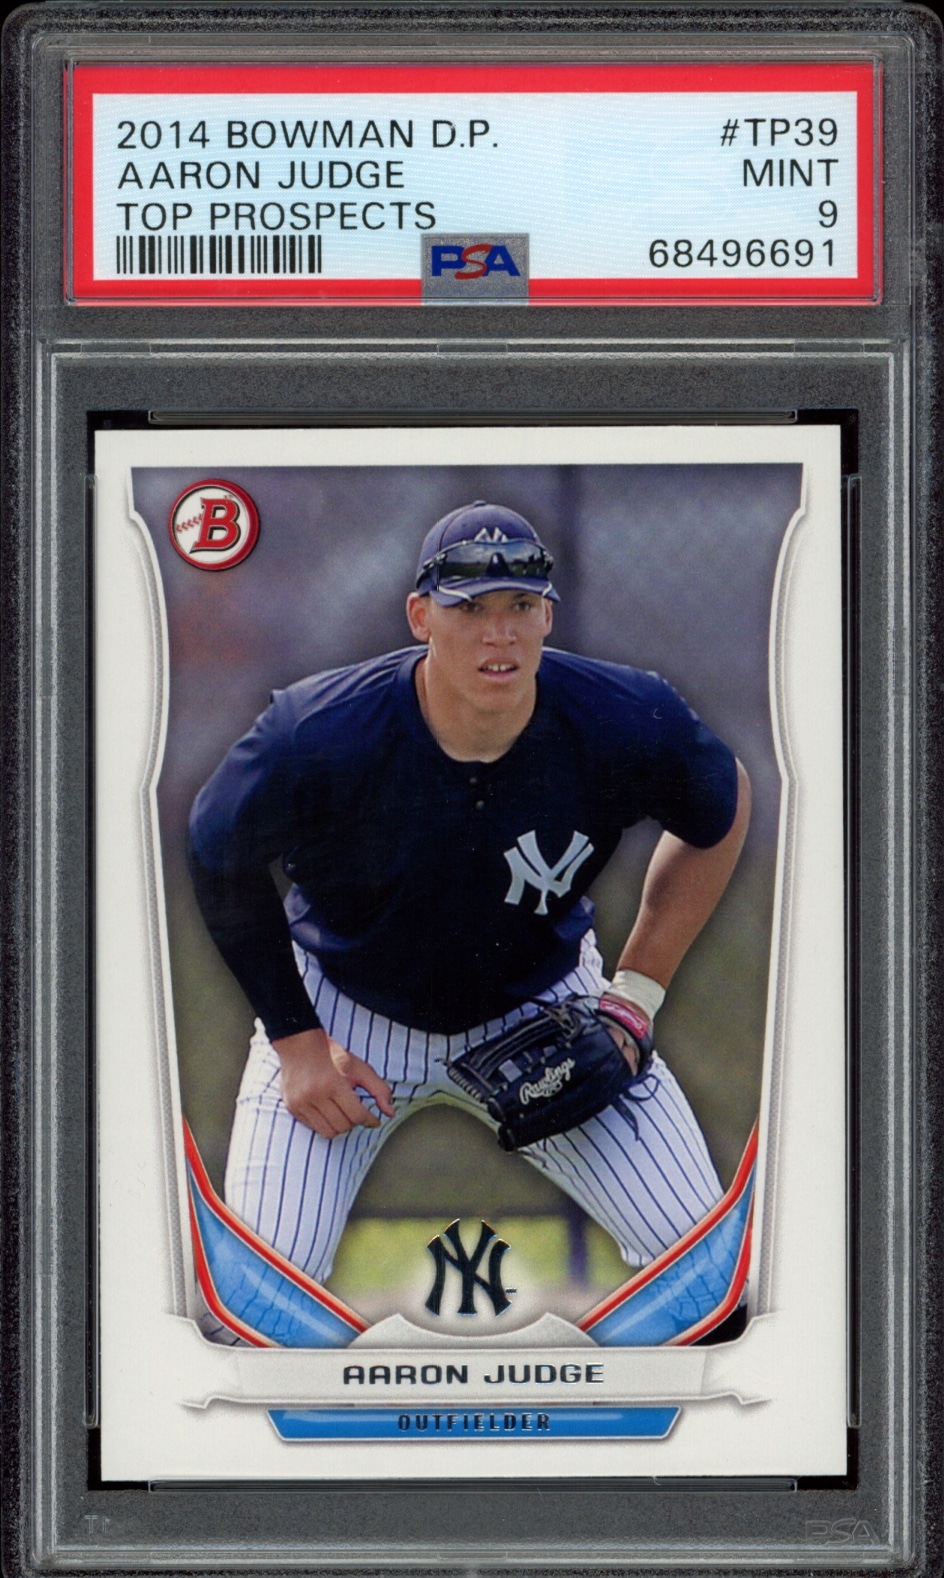 PSA 9 graded 2014 Bowman Draft card featuring Yankees Aaron Judge in action.